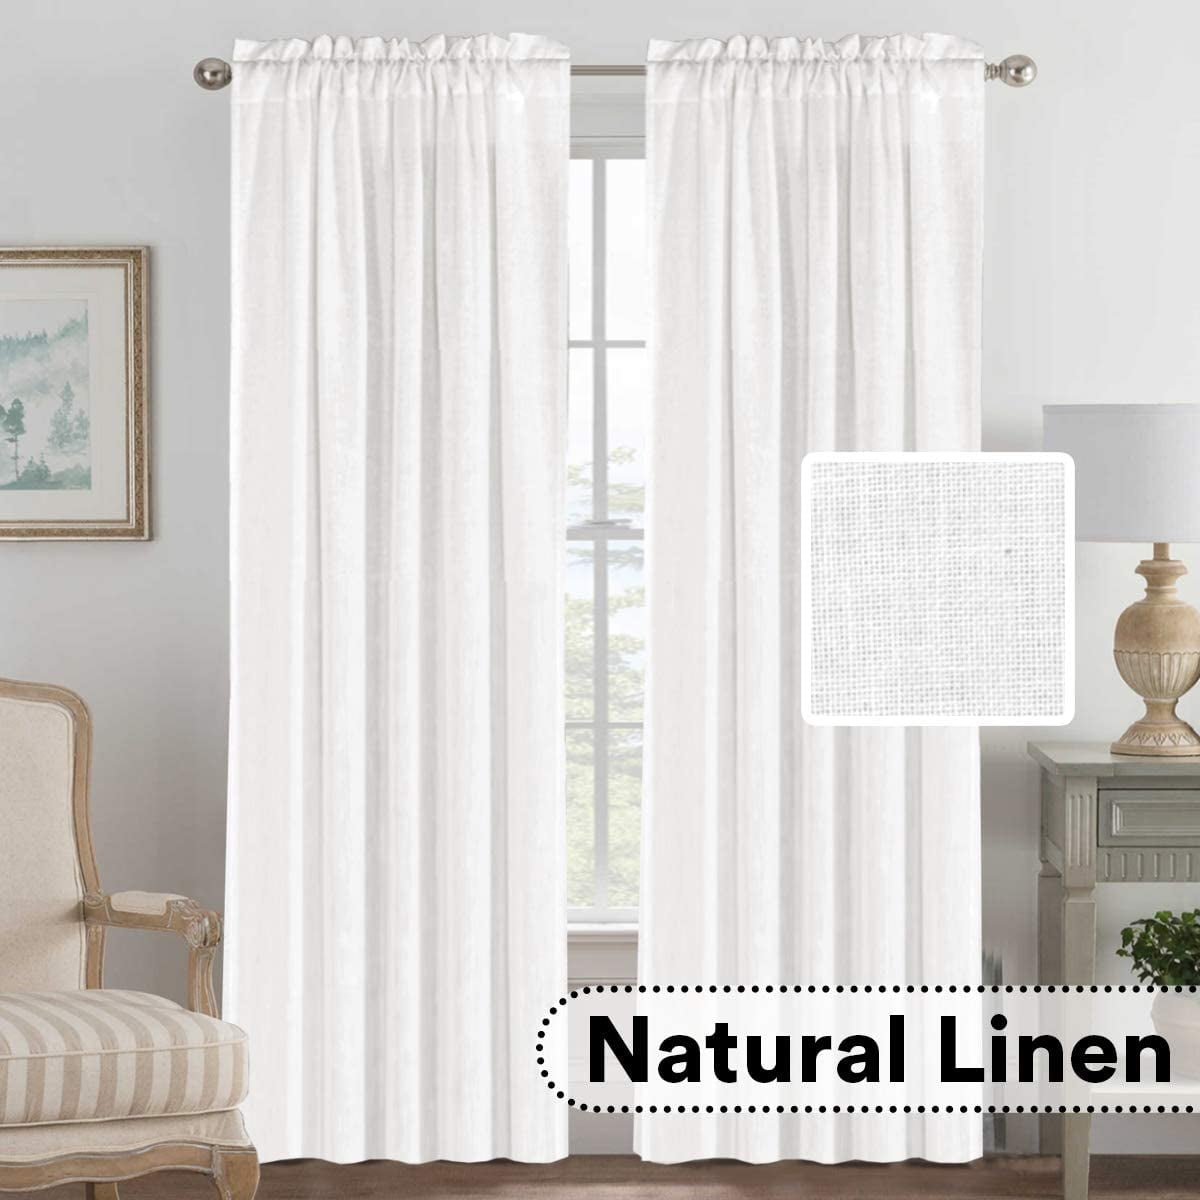 Shop Rich Linen Curtains Semi-Sheer for Bedroom/Living Room|Rod Pocket Textured Flax Window Curtain Drape from Walmart on Openhaus